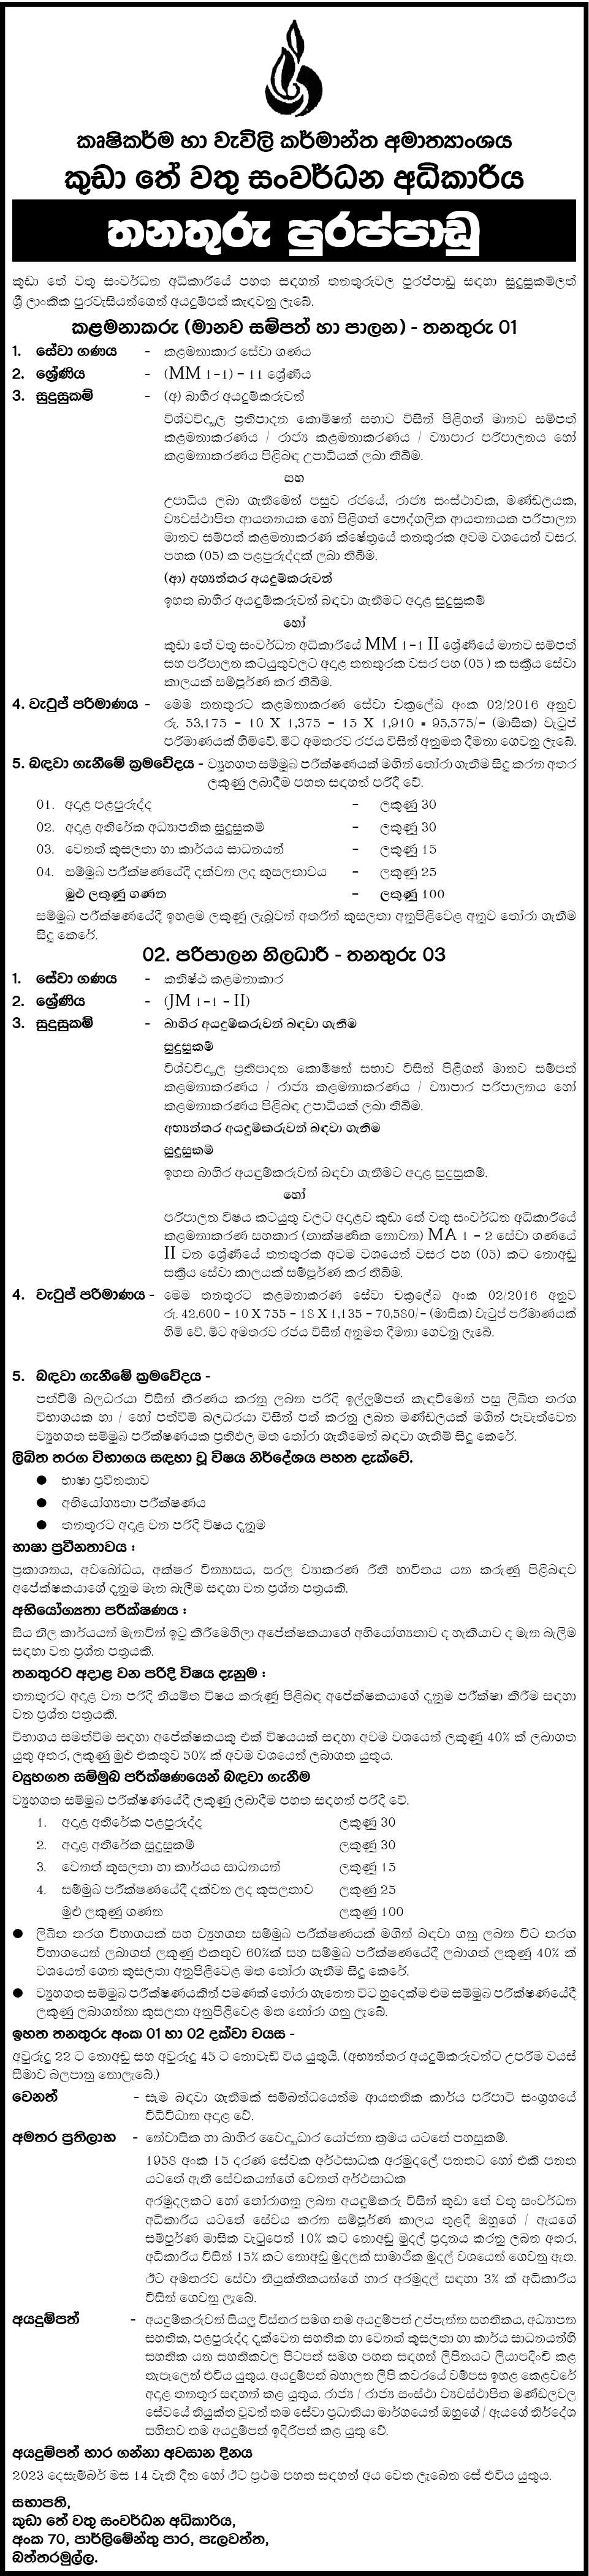 Manager, Administrative Officer